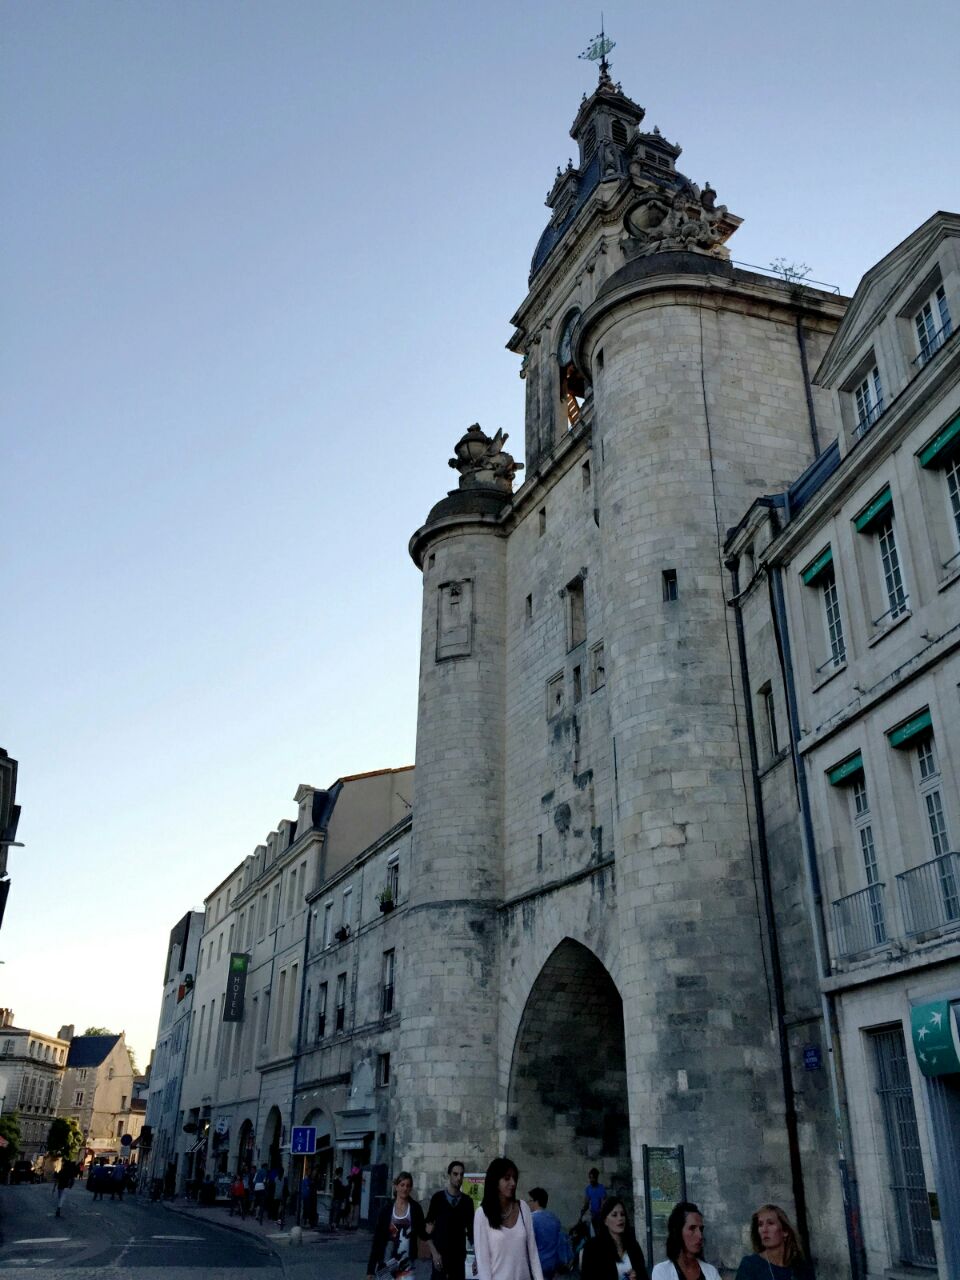 Porte de la Grosse-Horloge attraction reviews - Porte de la Grosse-Horloge  tickets - Porte de la Grosse-Horloge discounts - Porte de la Grosse-Horloge  transportation, address, opening hours - attractions, hotels, and food